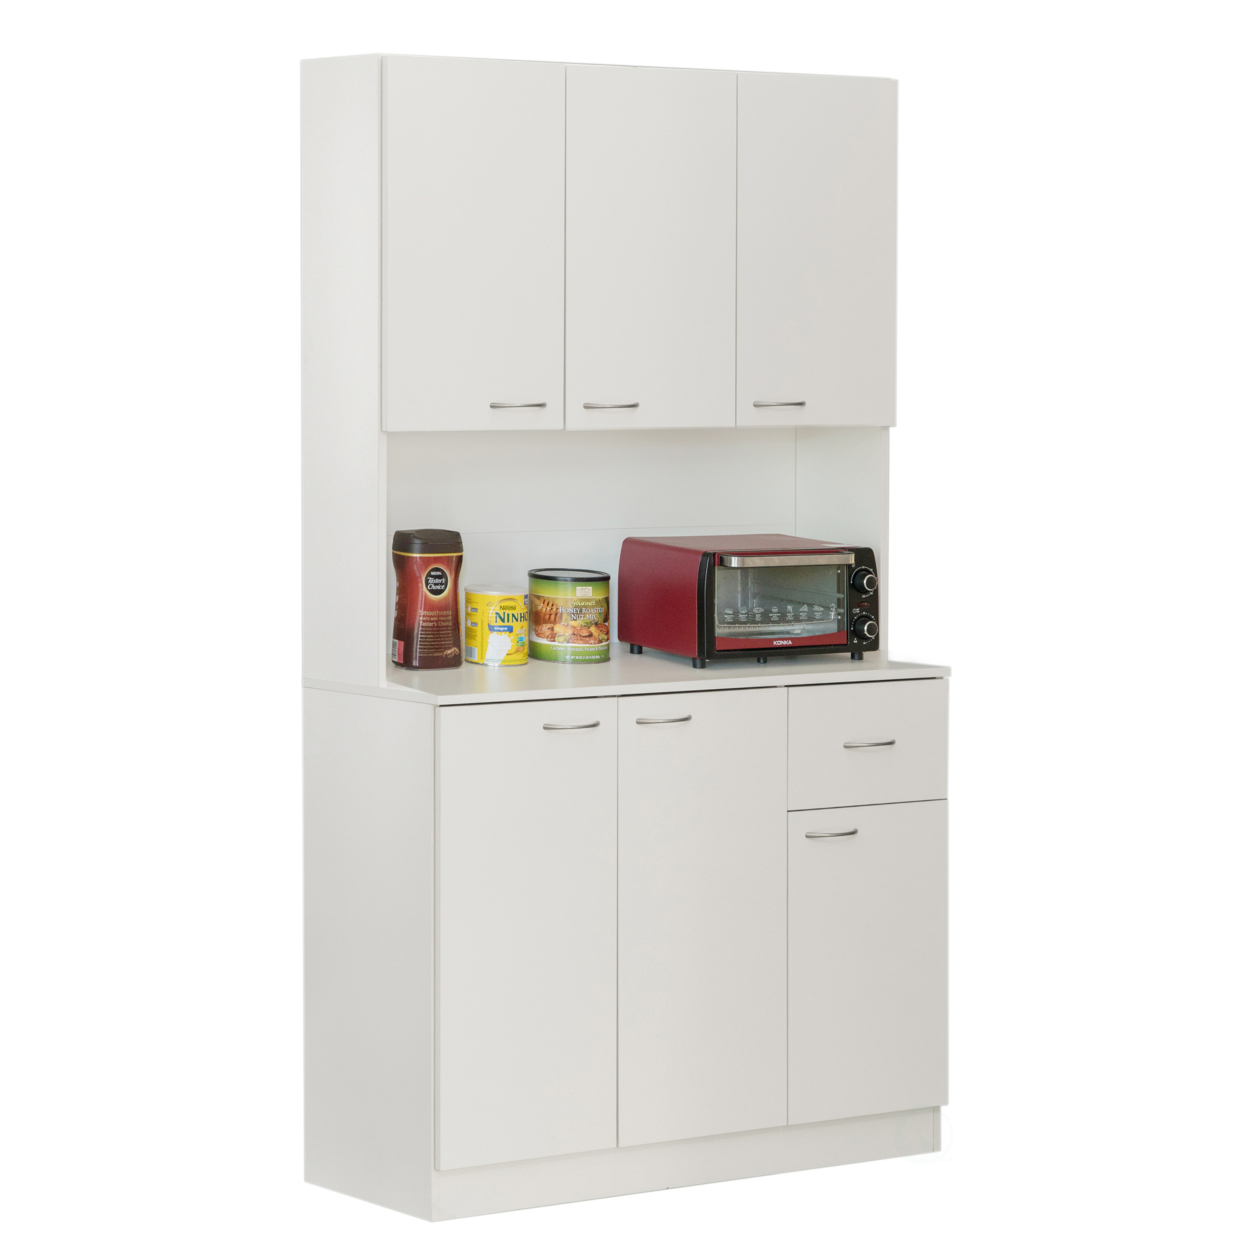 Kitchen Pantry Storage Cabinet with Drawer, Doors and Shelves, White